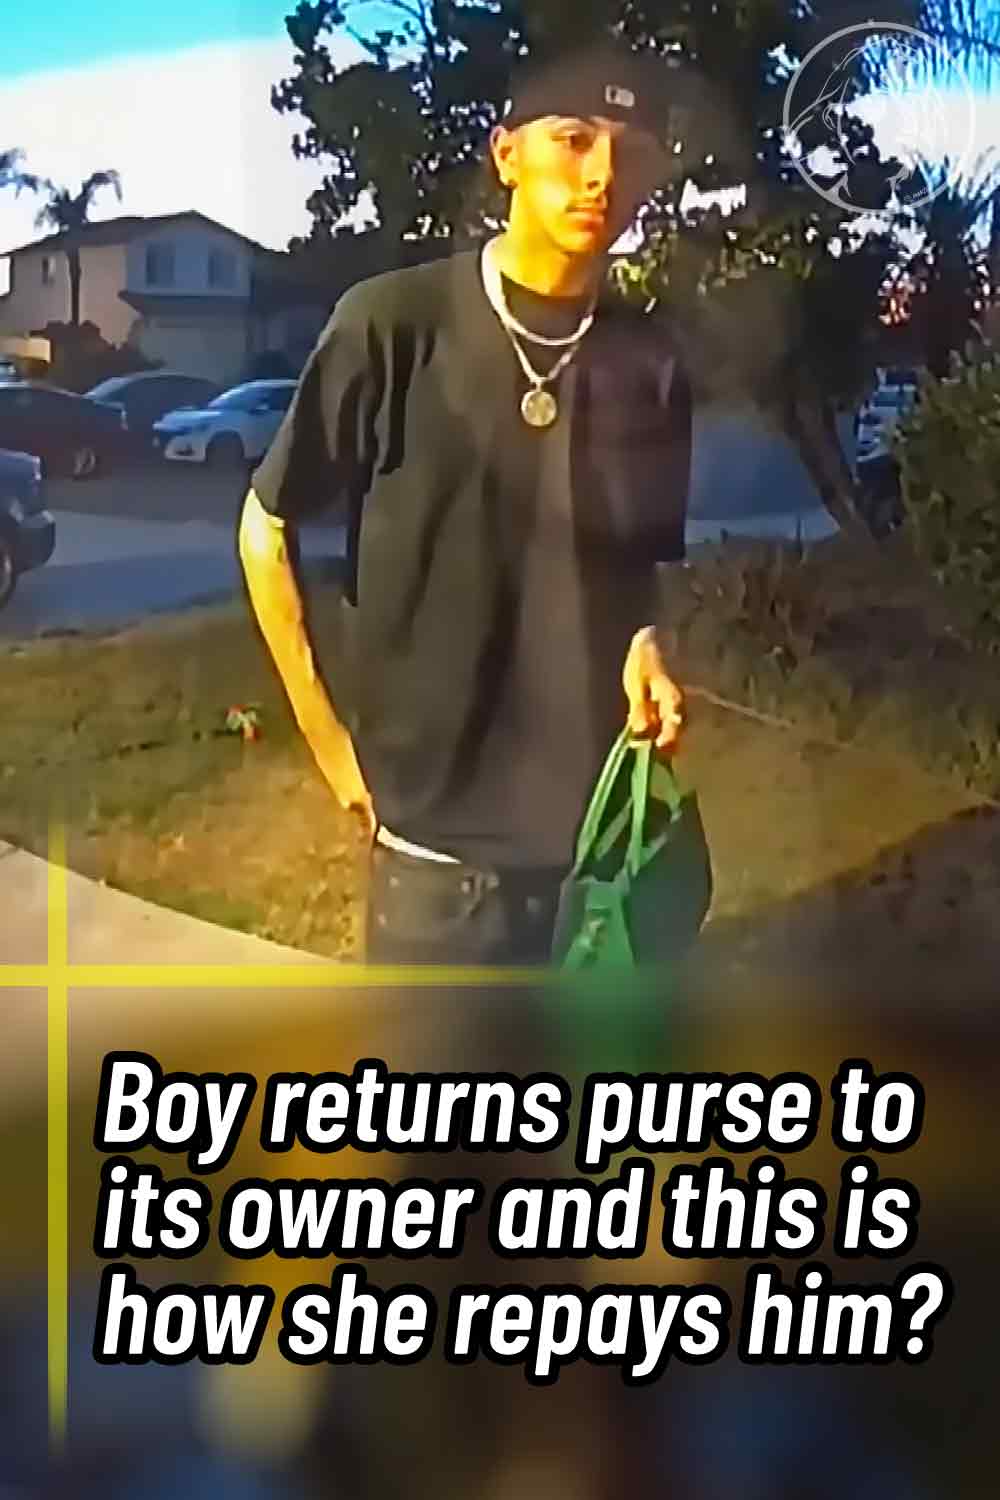 Boy returns purse to its owner and this is how she repays him?